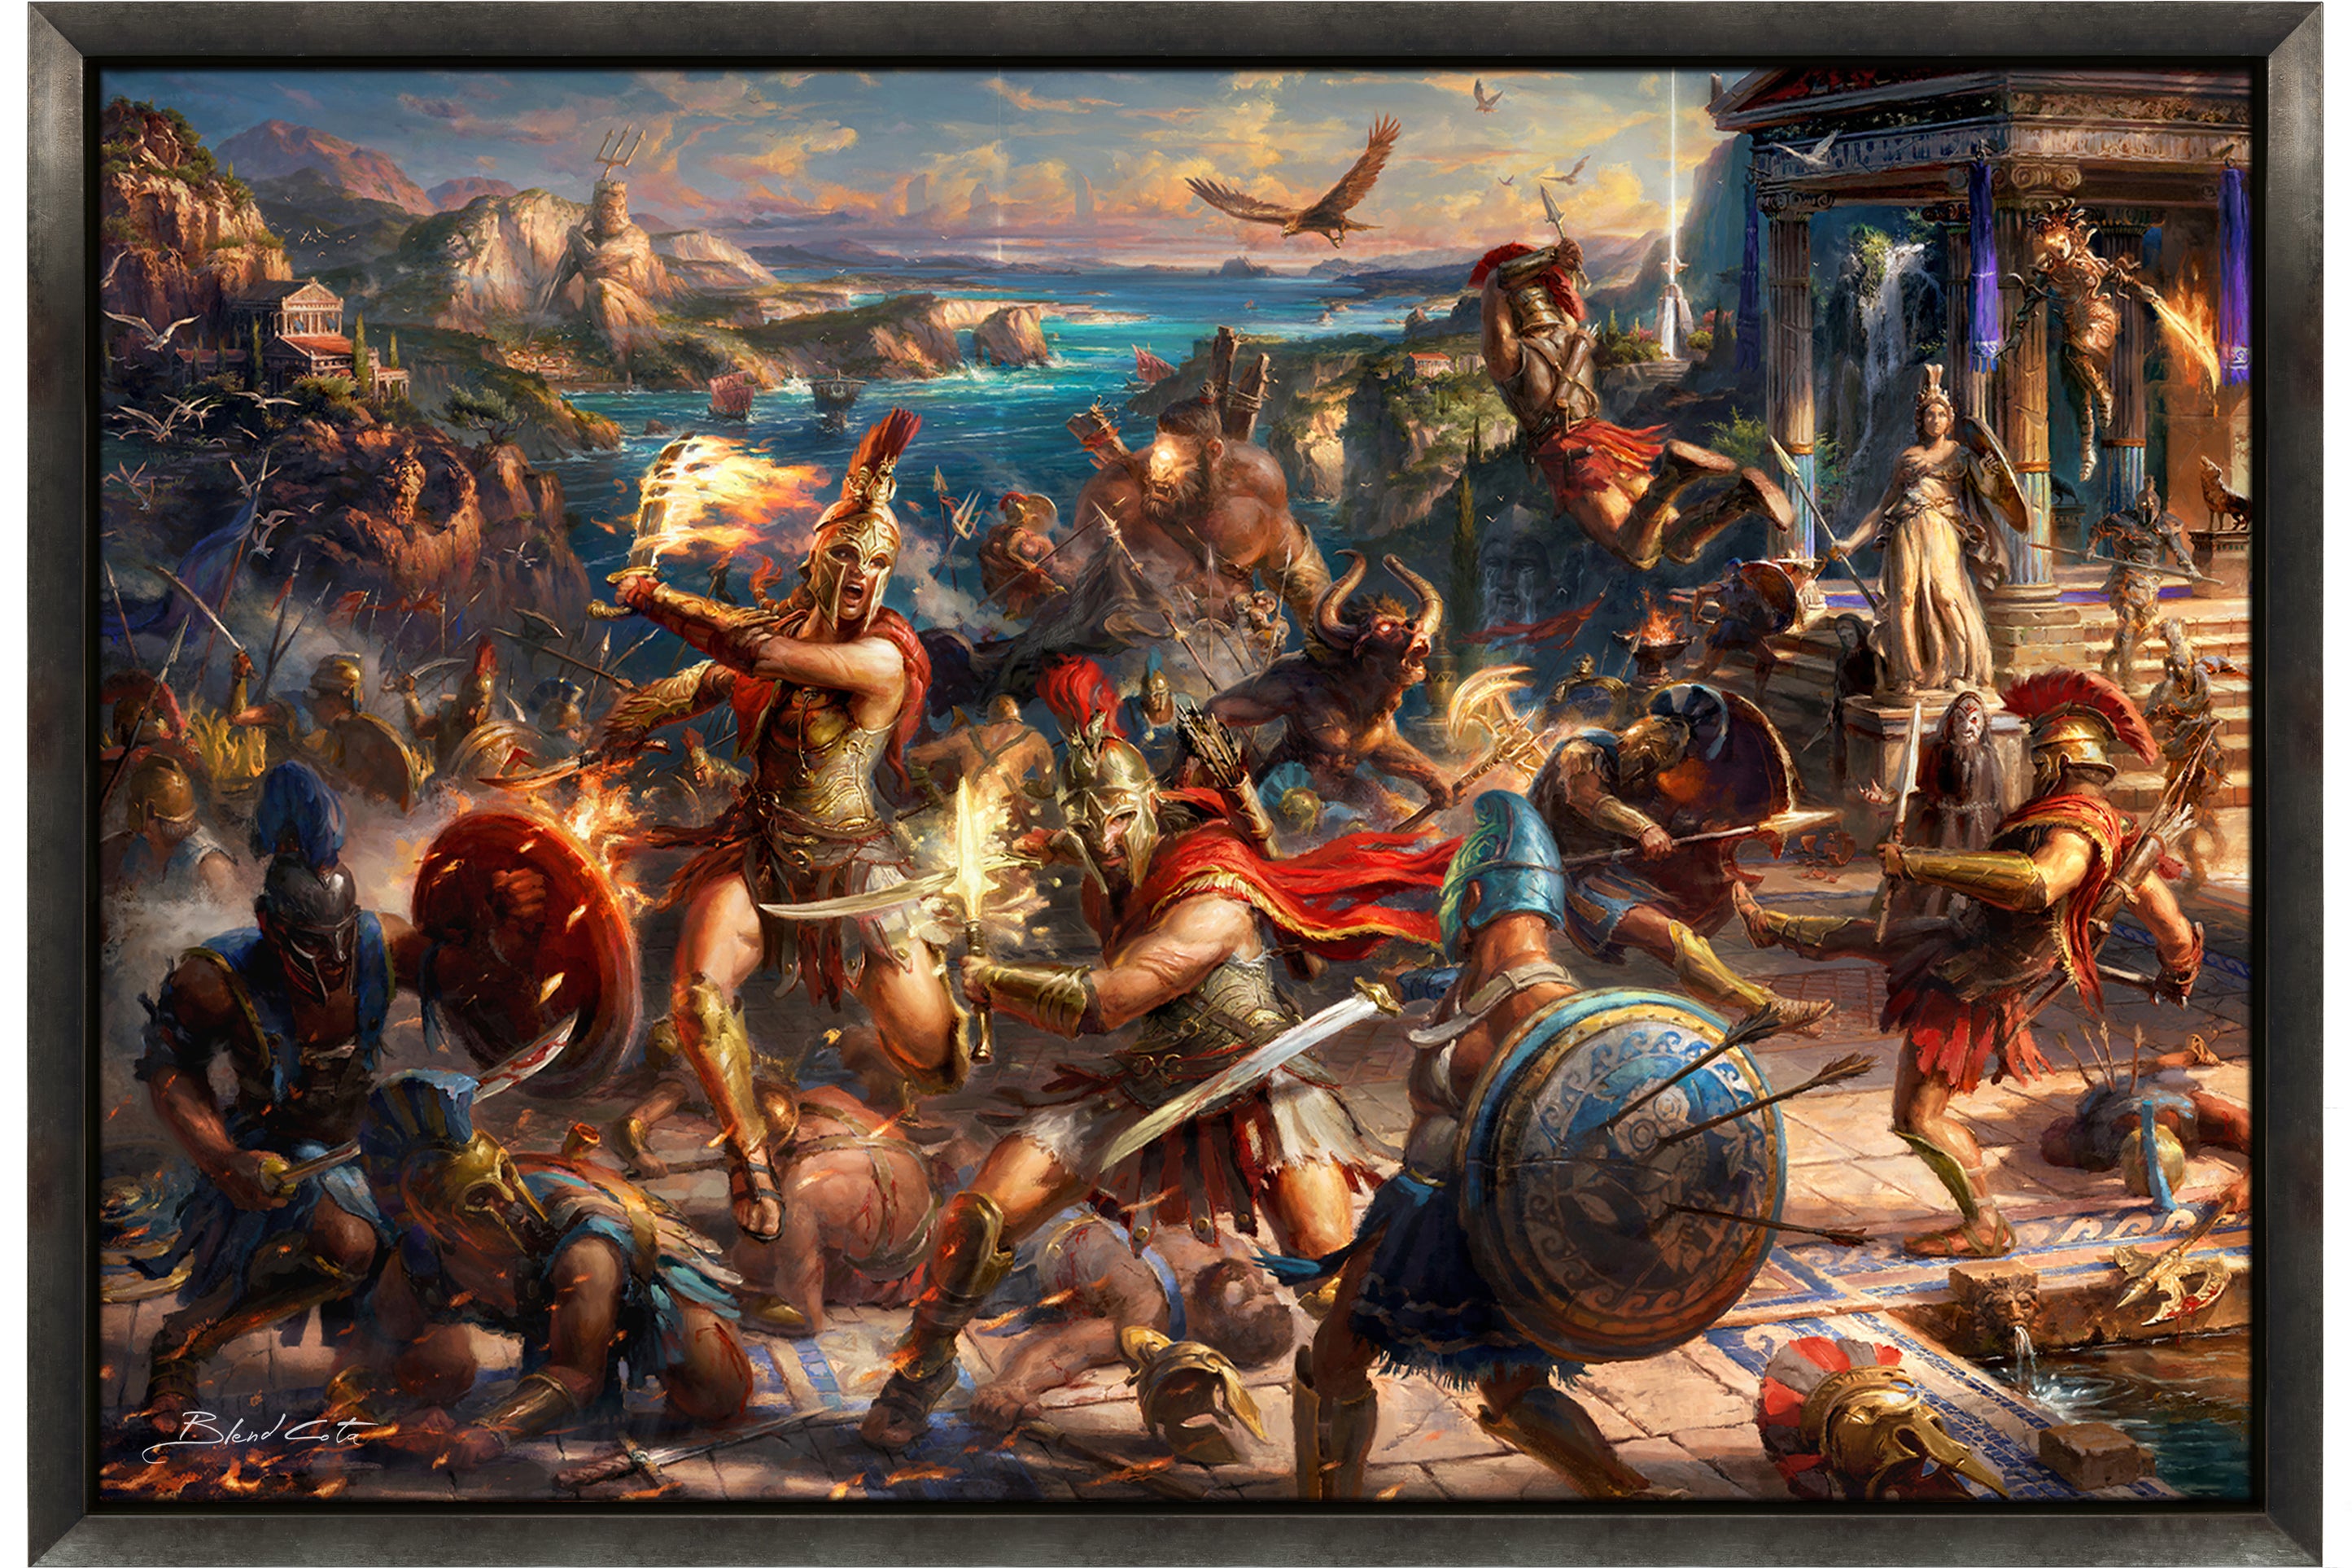 A battle of mythological creatures and Spartan warriors,  from Ubisoft's Assassin's Creed Odyssey with Kassandra and Alexios fighting by a temple in this original oil painting on canvas, pictured in a pewter dull burnished metallic frame.